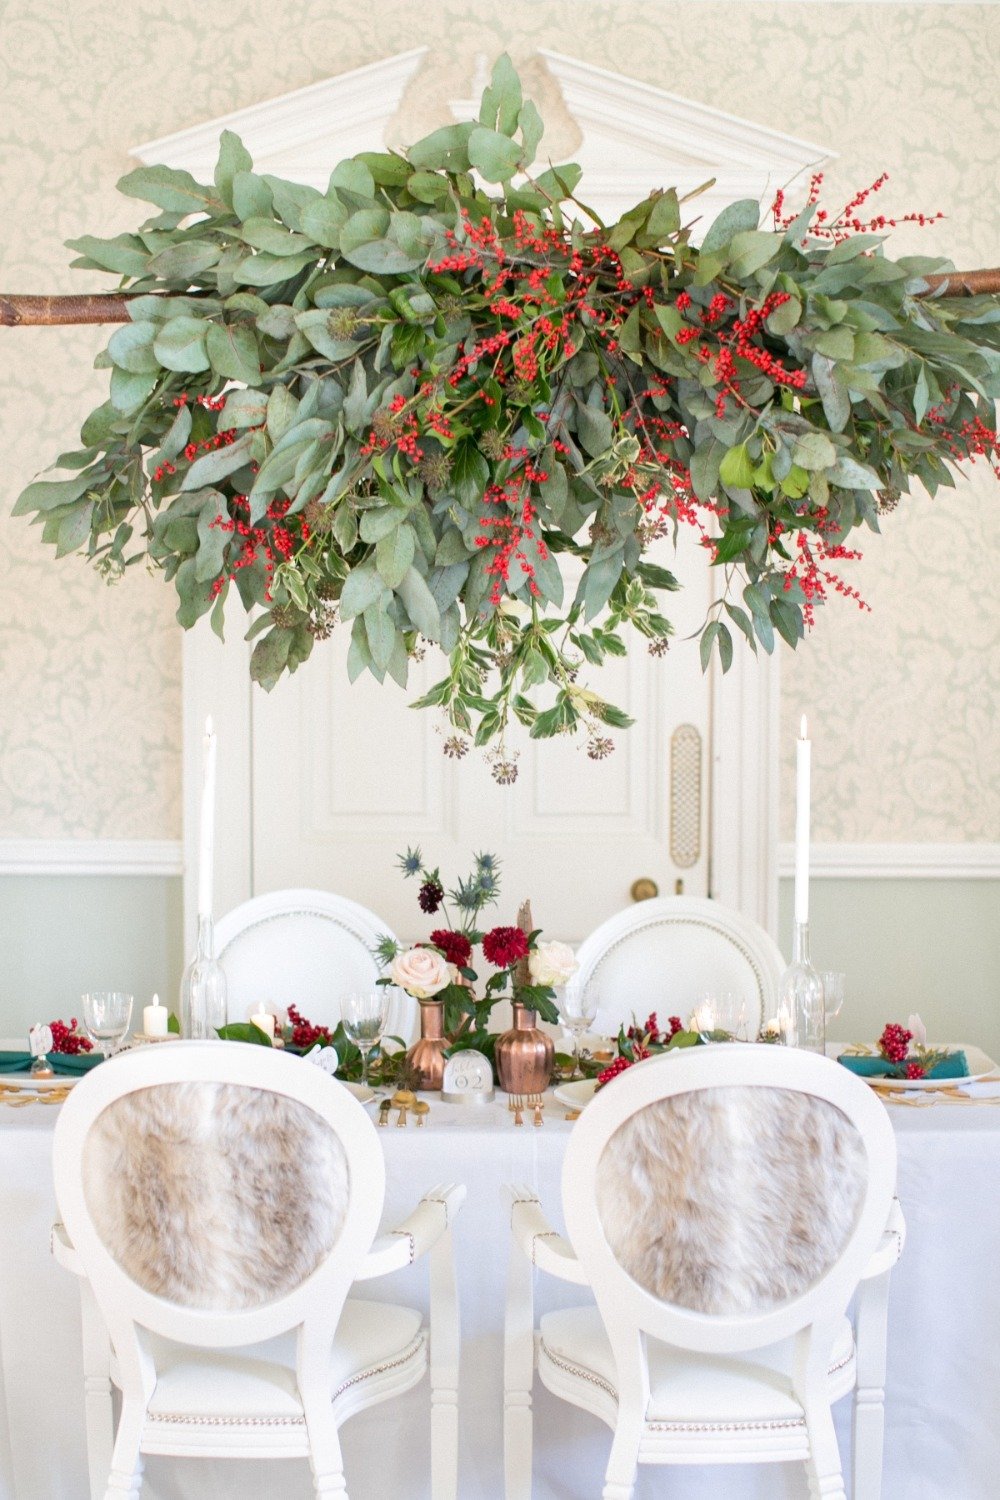 Winter reception with greenery